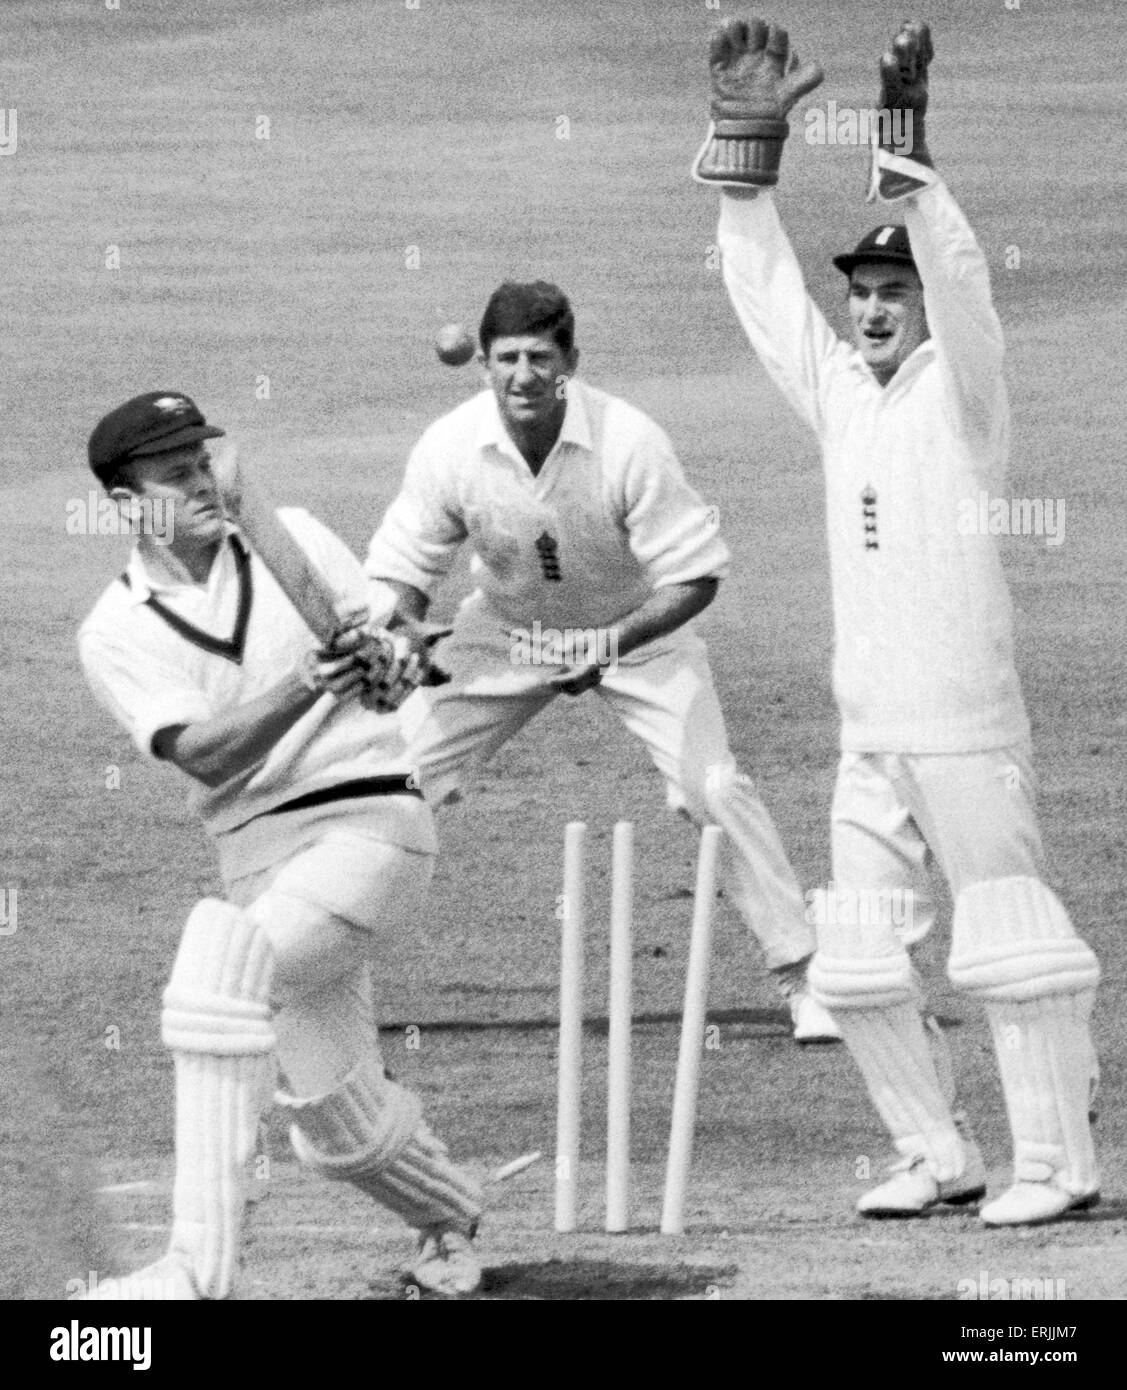 Australian cricket tour of England for the Ashes. England v Australia 3rd Test match at Edgbaston. England claim the wicket of Alan Connolly in the first innings, with wicket keeper Alan Knott and slip fielder Ken Barrington celebrating bowler Ray IllingworthÕs successful delivery.    July 1968. Stock Photo